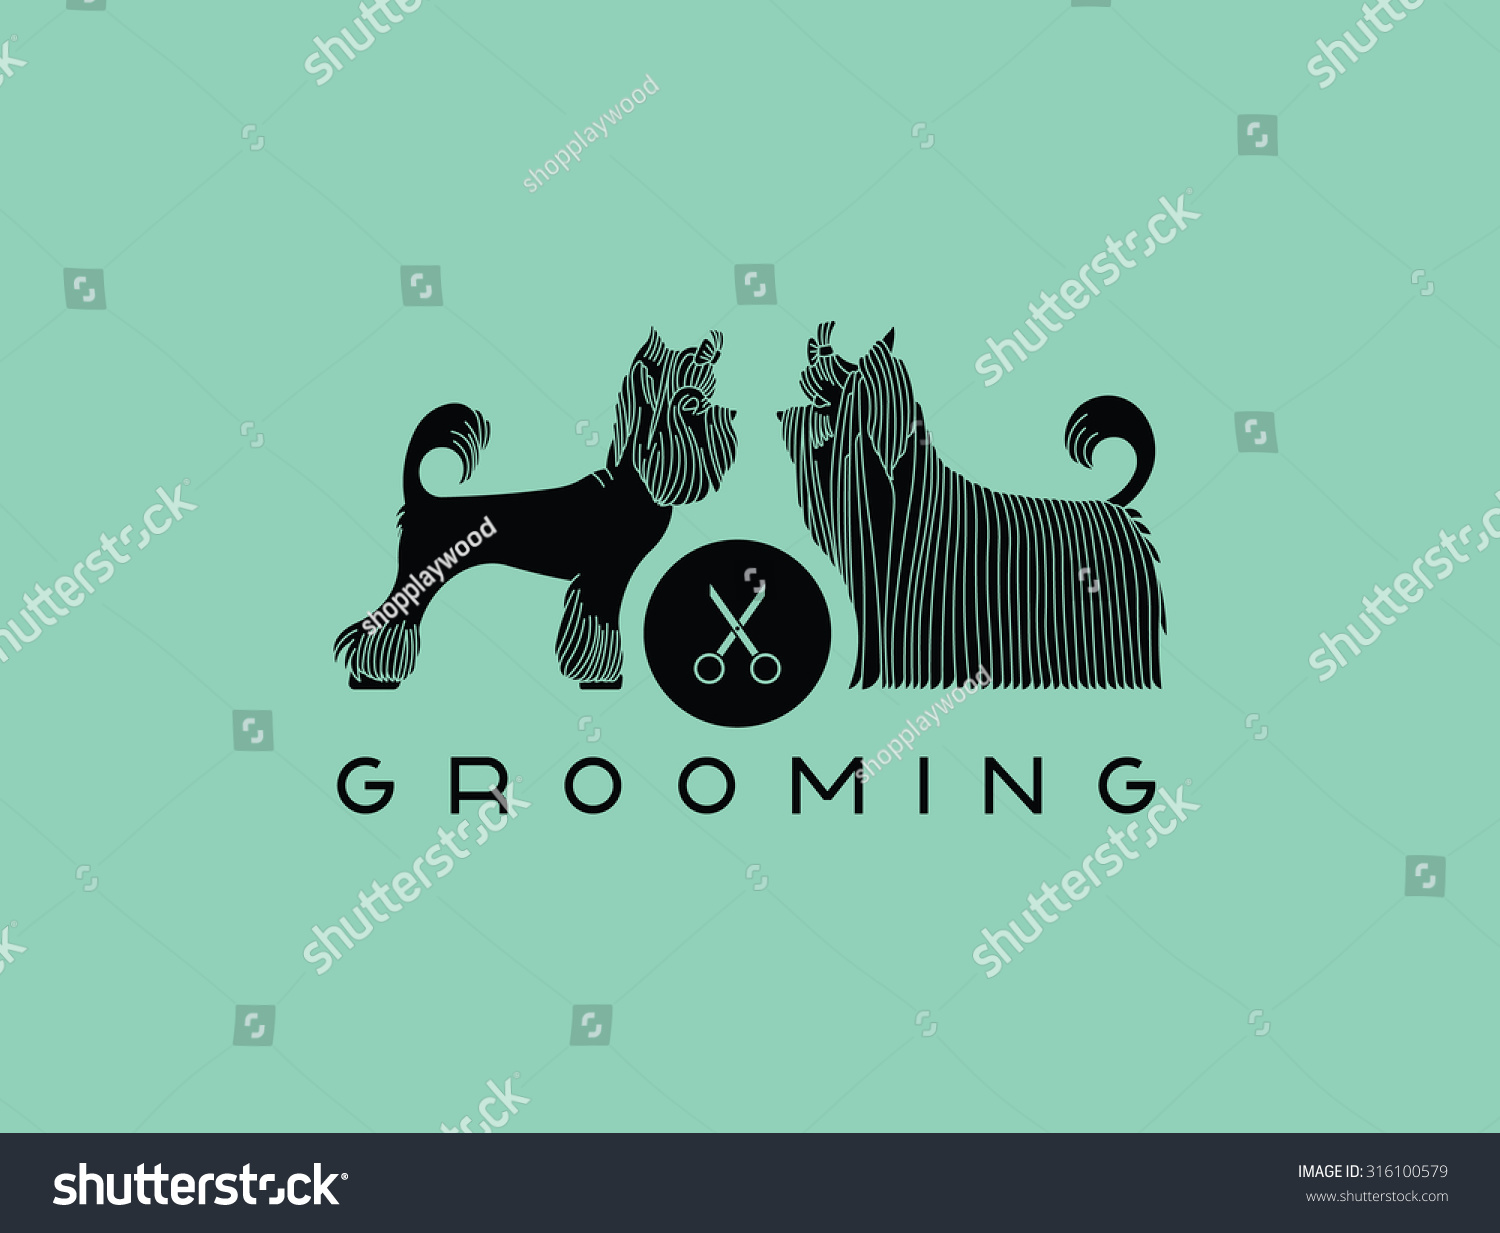 Vector Dog Beauty Grooming Salon. Illustration With Yorkshire Terriers ...